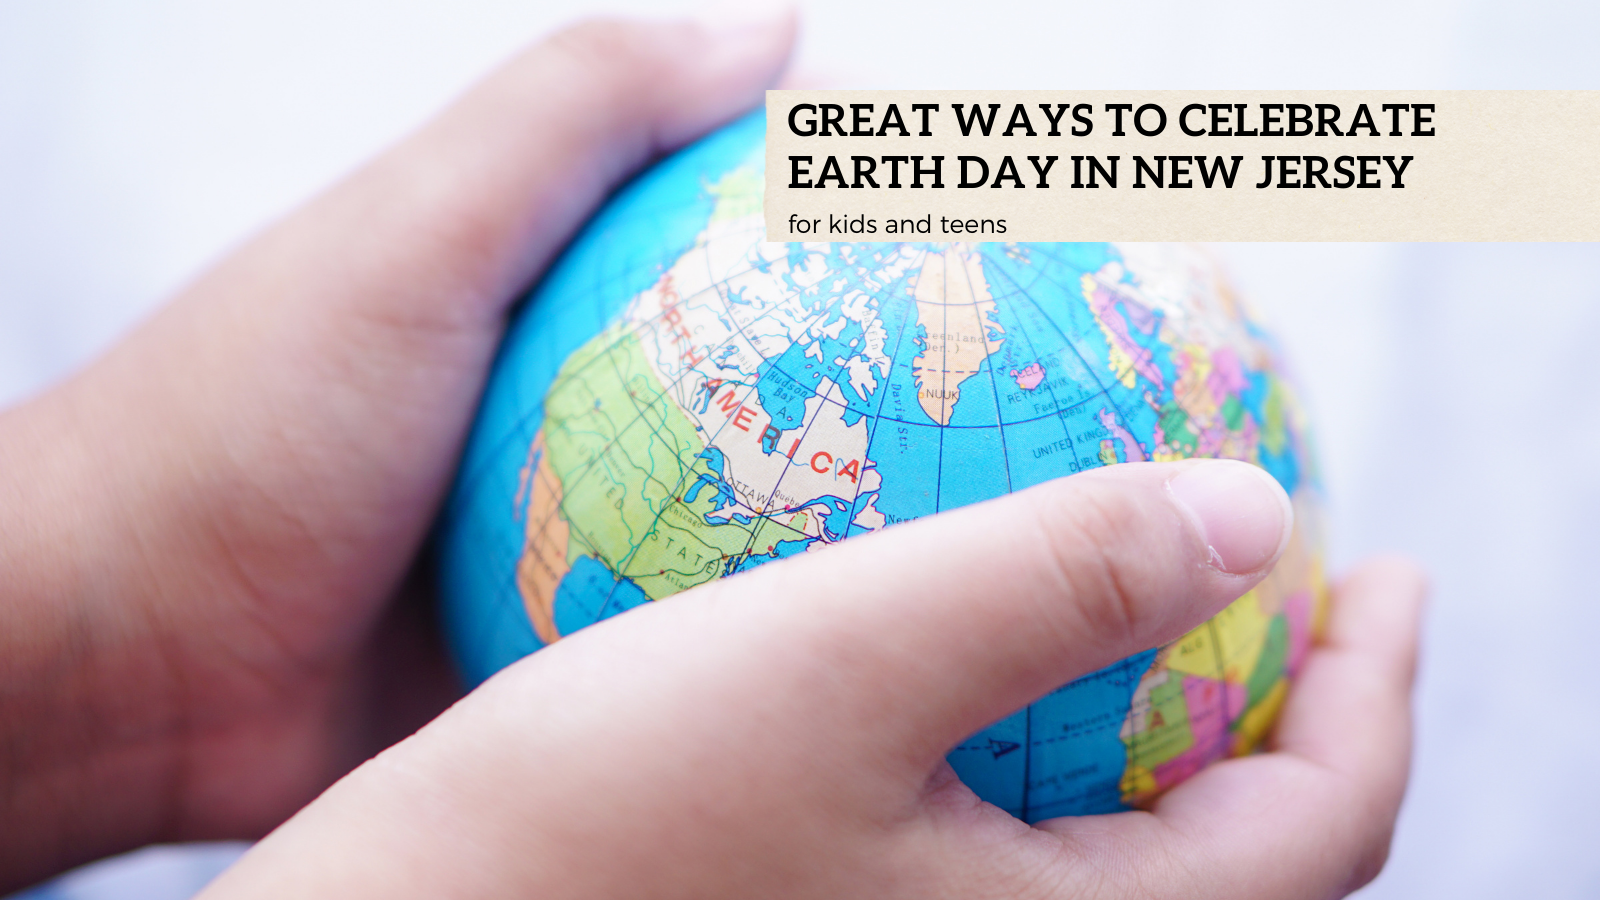 Great-Ways-to-Celebrate-Earth-Day-in-New-Jersey-with-Kida-and-teens-horizontal-image